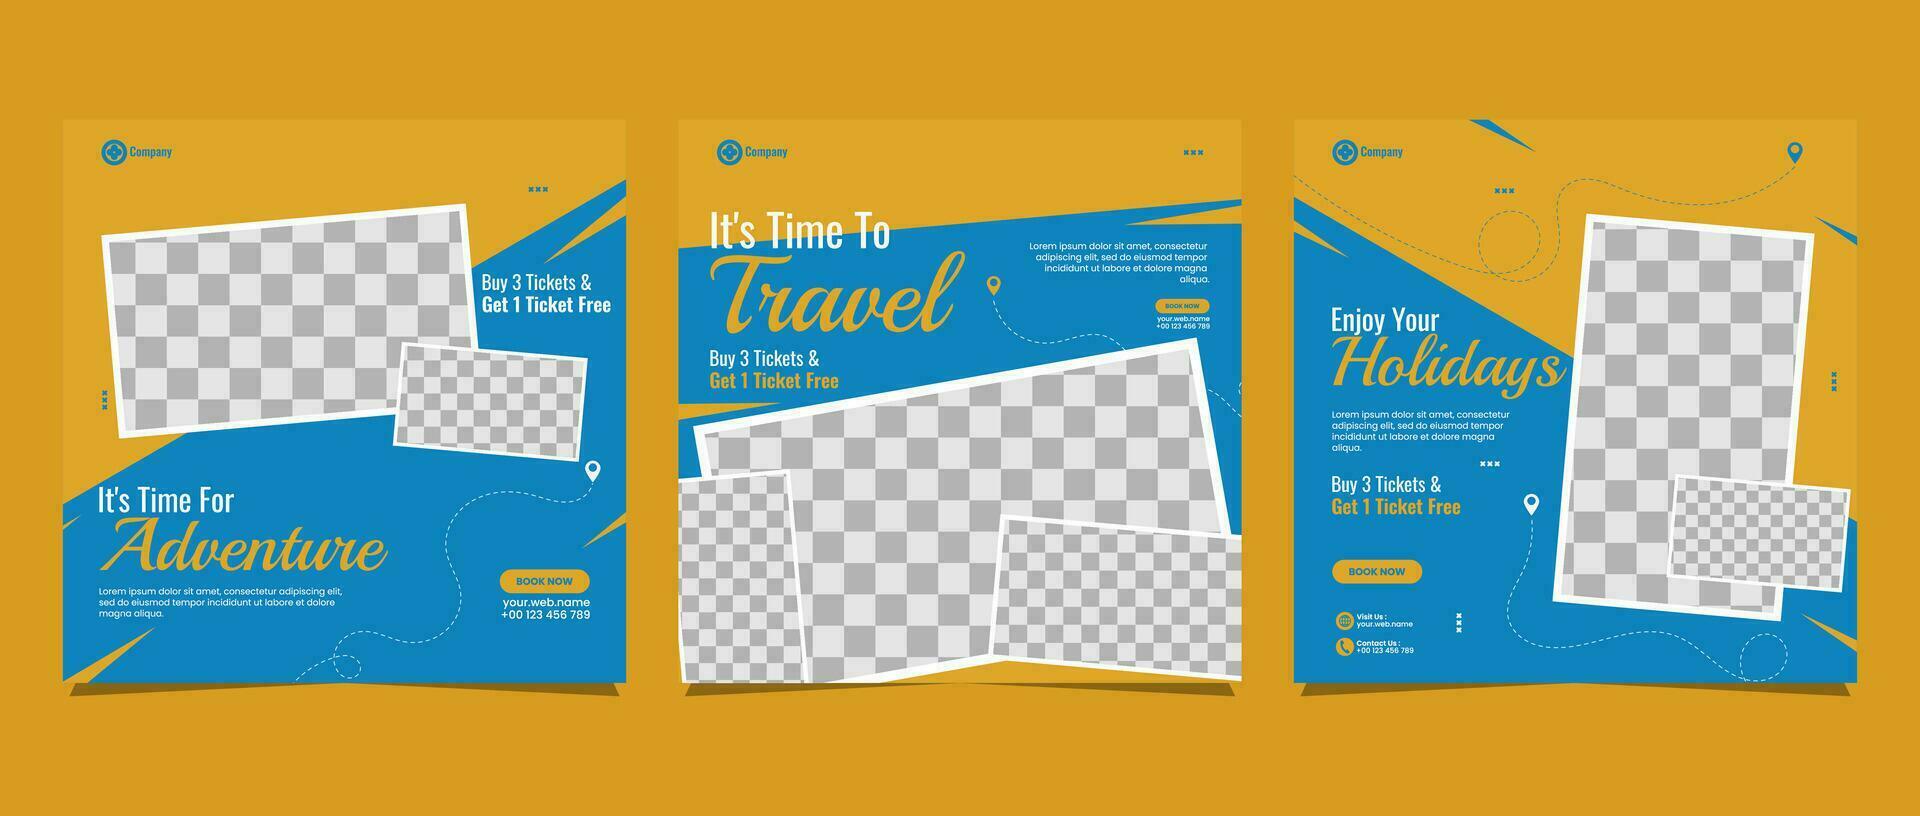 Travel business promotion web banner template design for social media marketing, tour advertising, banner offer, and and sale promo vector